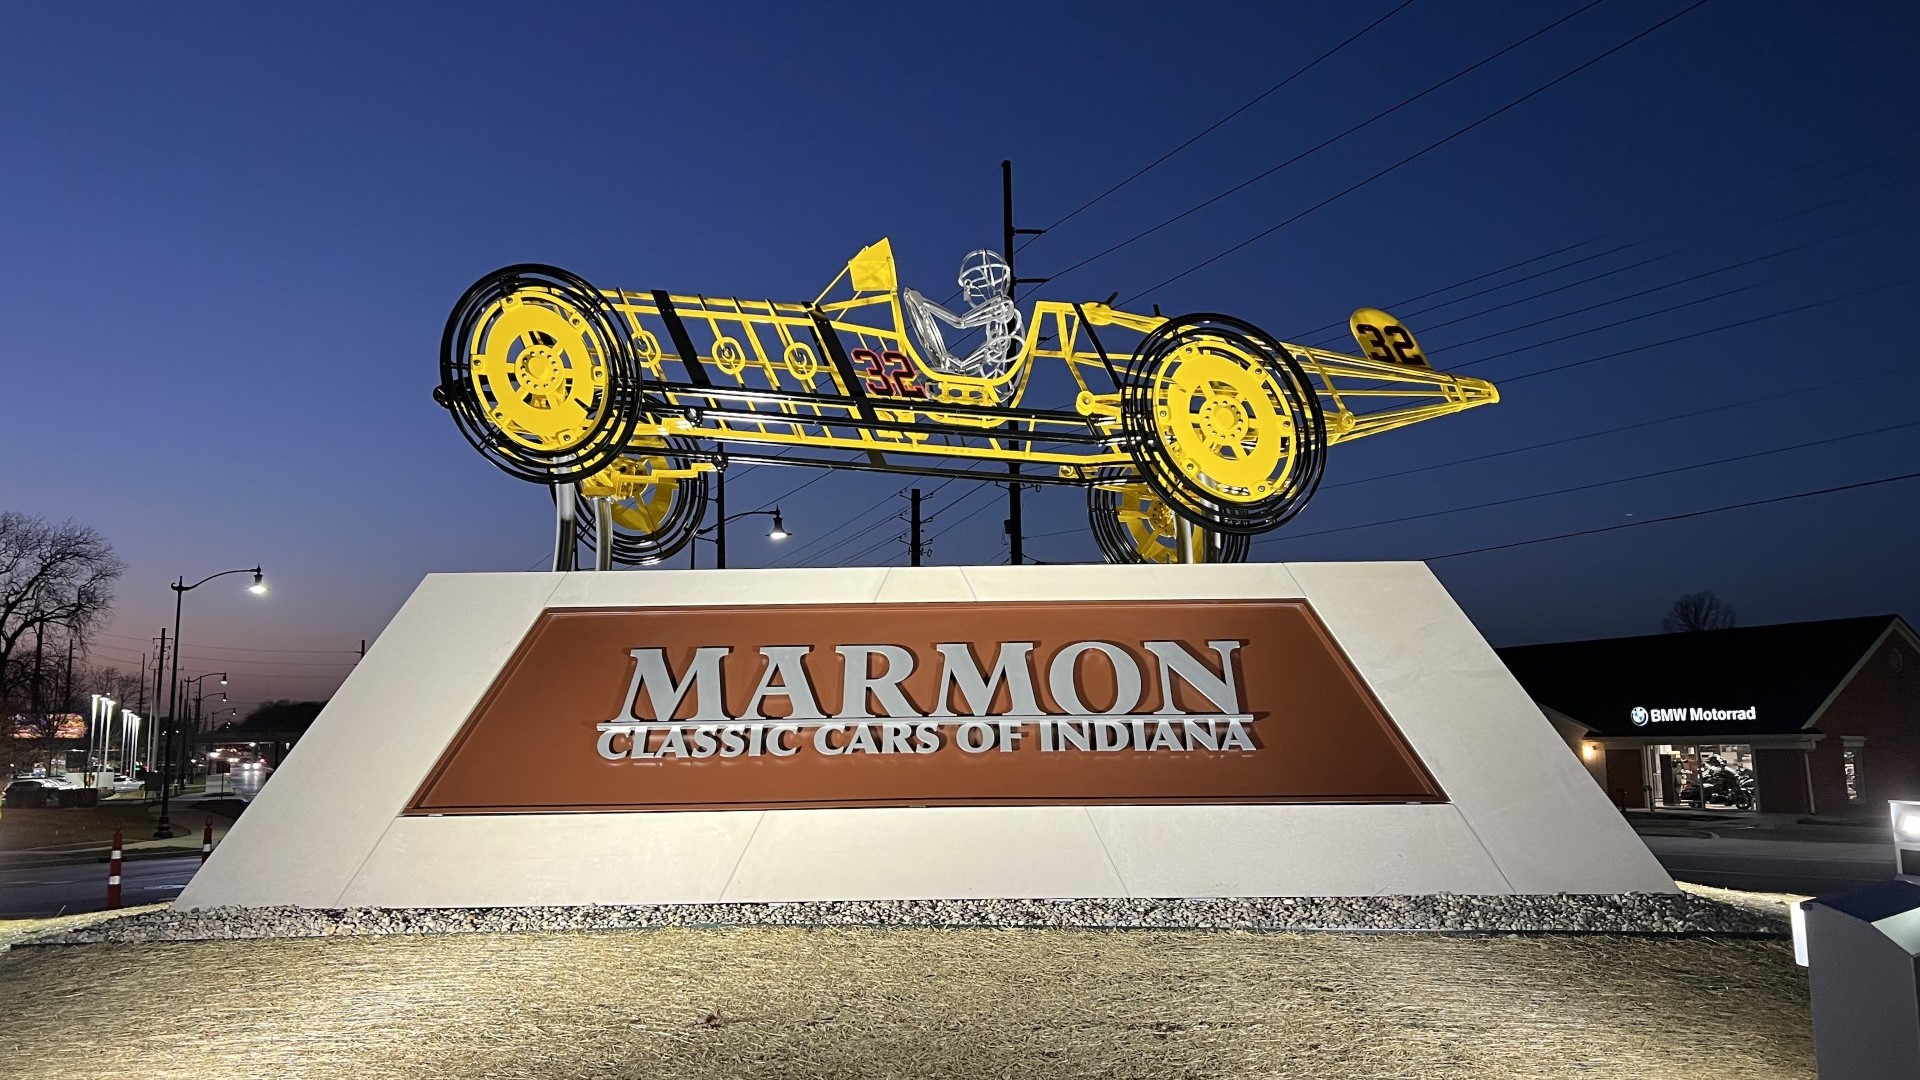 The first sculpture installed at 96th Street and Priority Way is the Marmon Wasp.